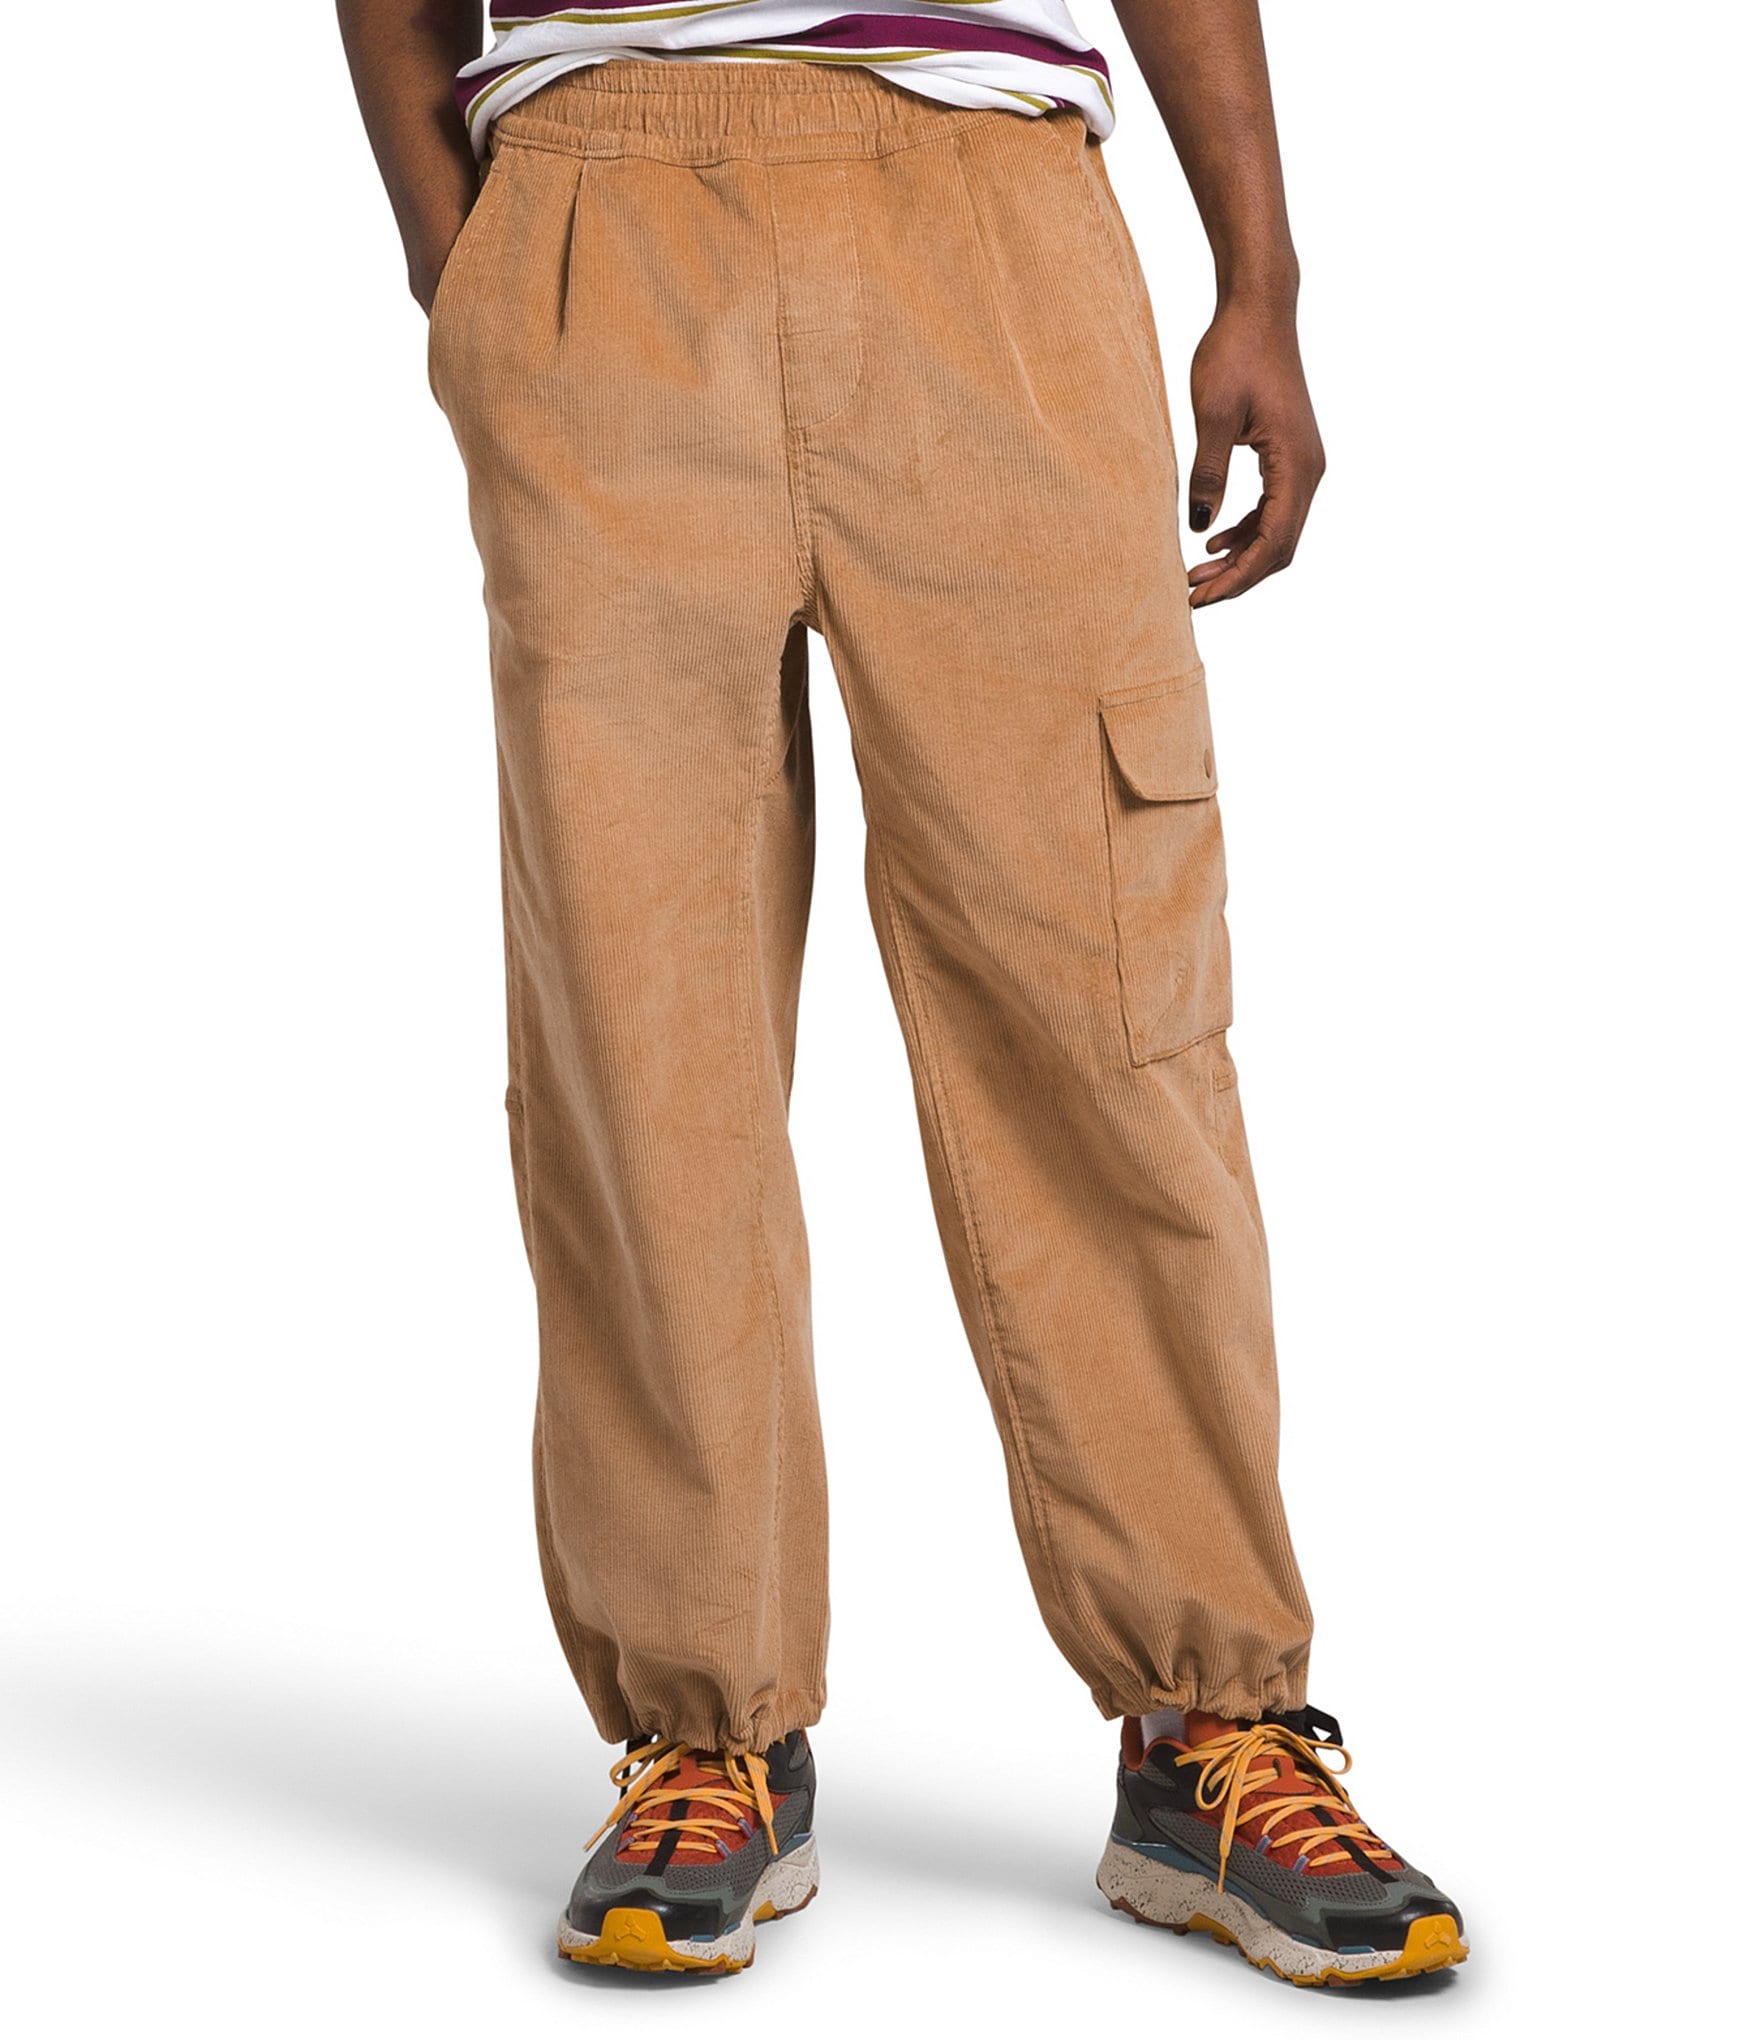 https://dimg.dillards.com/is/image/DillardsZoom/zoom/the-north-face-utility-relaxed-fit-wale-corduroy-pants/00000000_zi_b7f89489-848f-4e45-84ae-138f7a89ad43.jpg